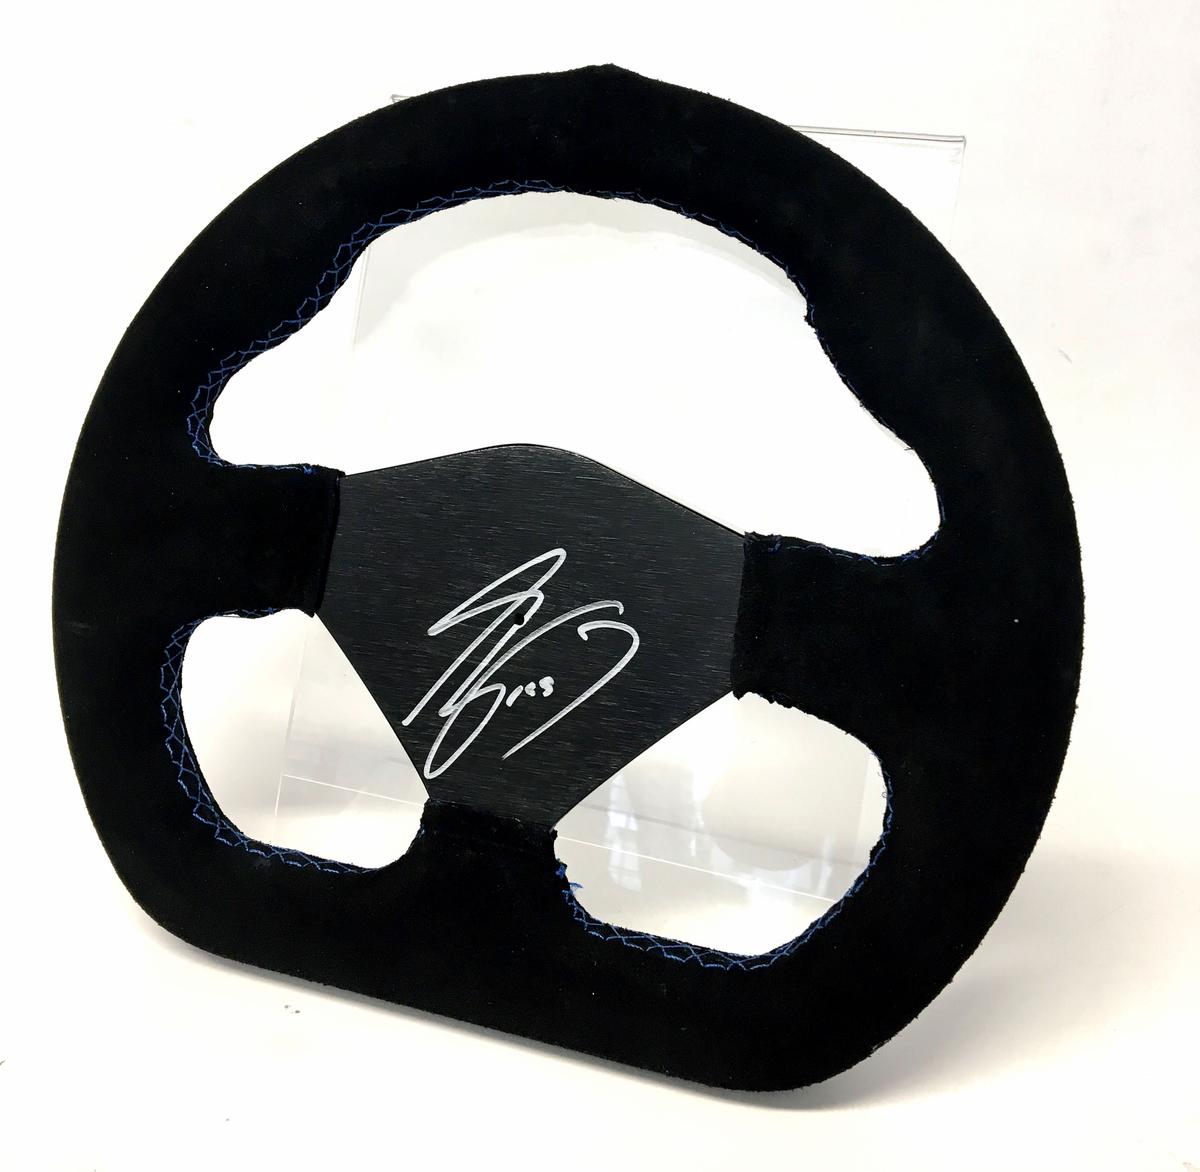 Racing Steering Wheel, signed by Alain Prost OBE